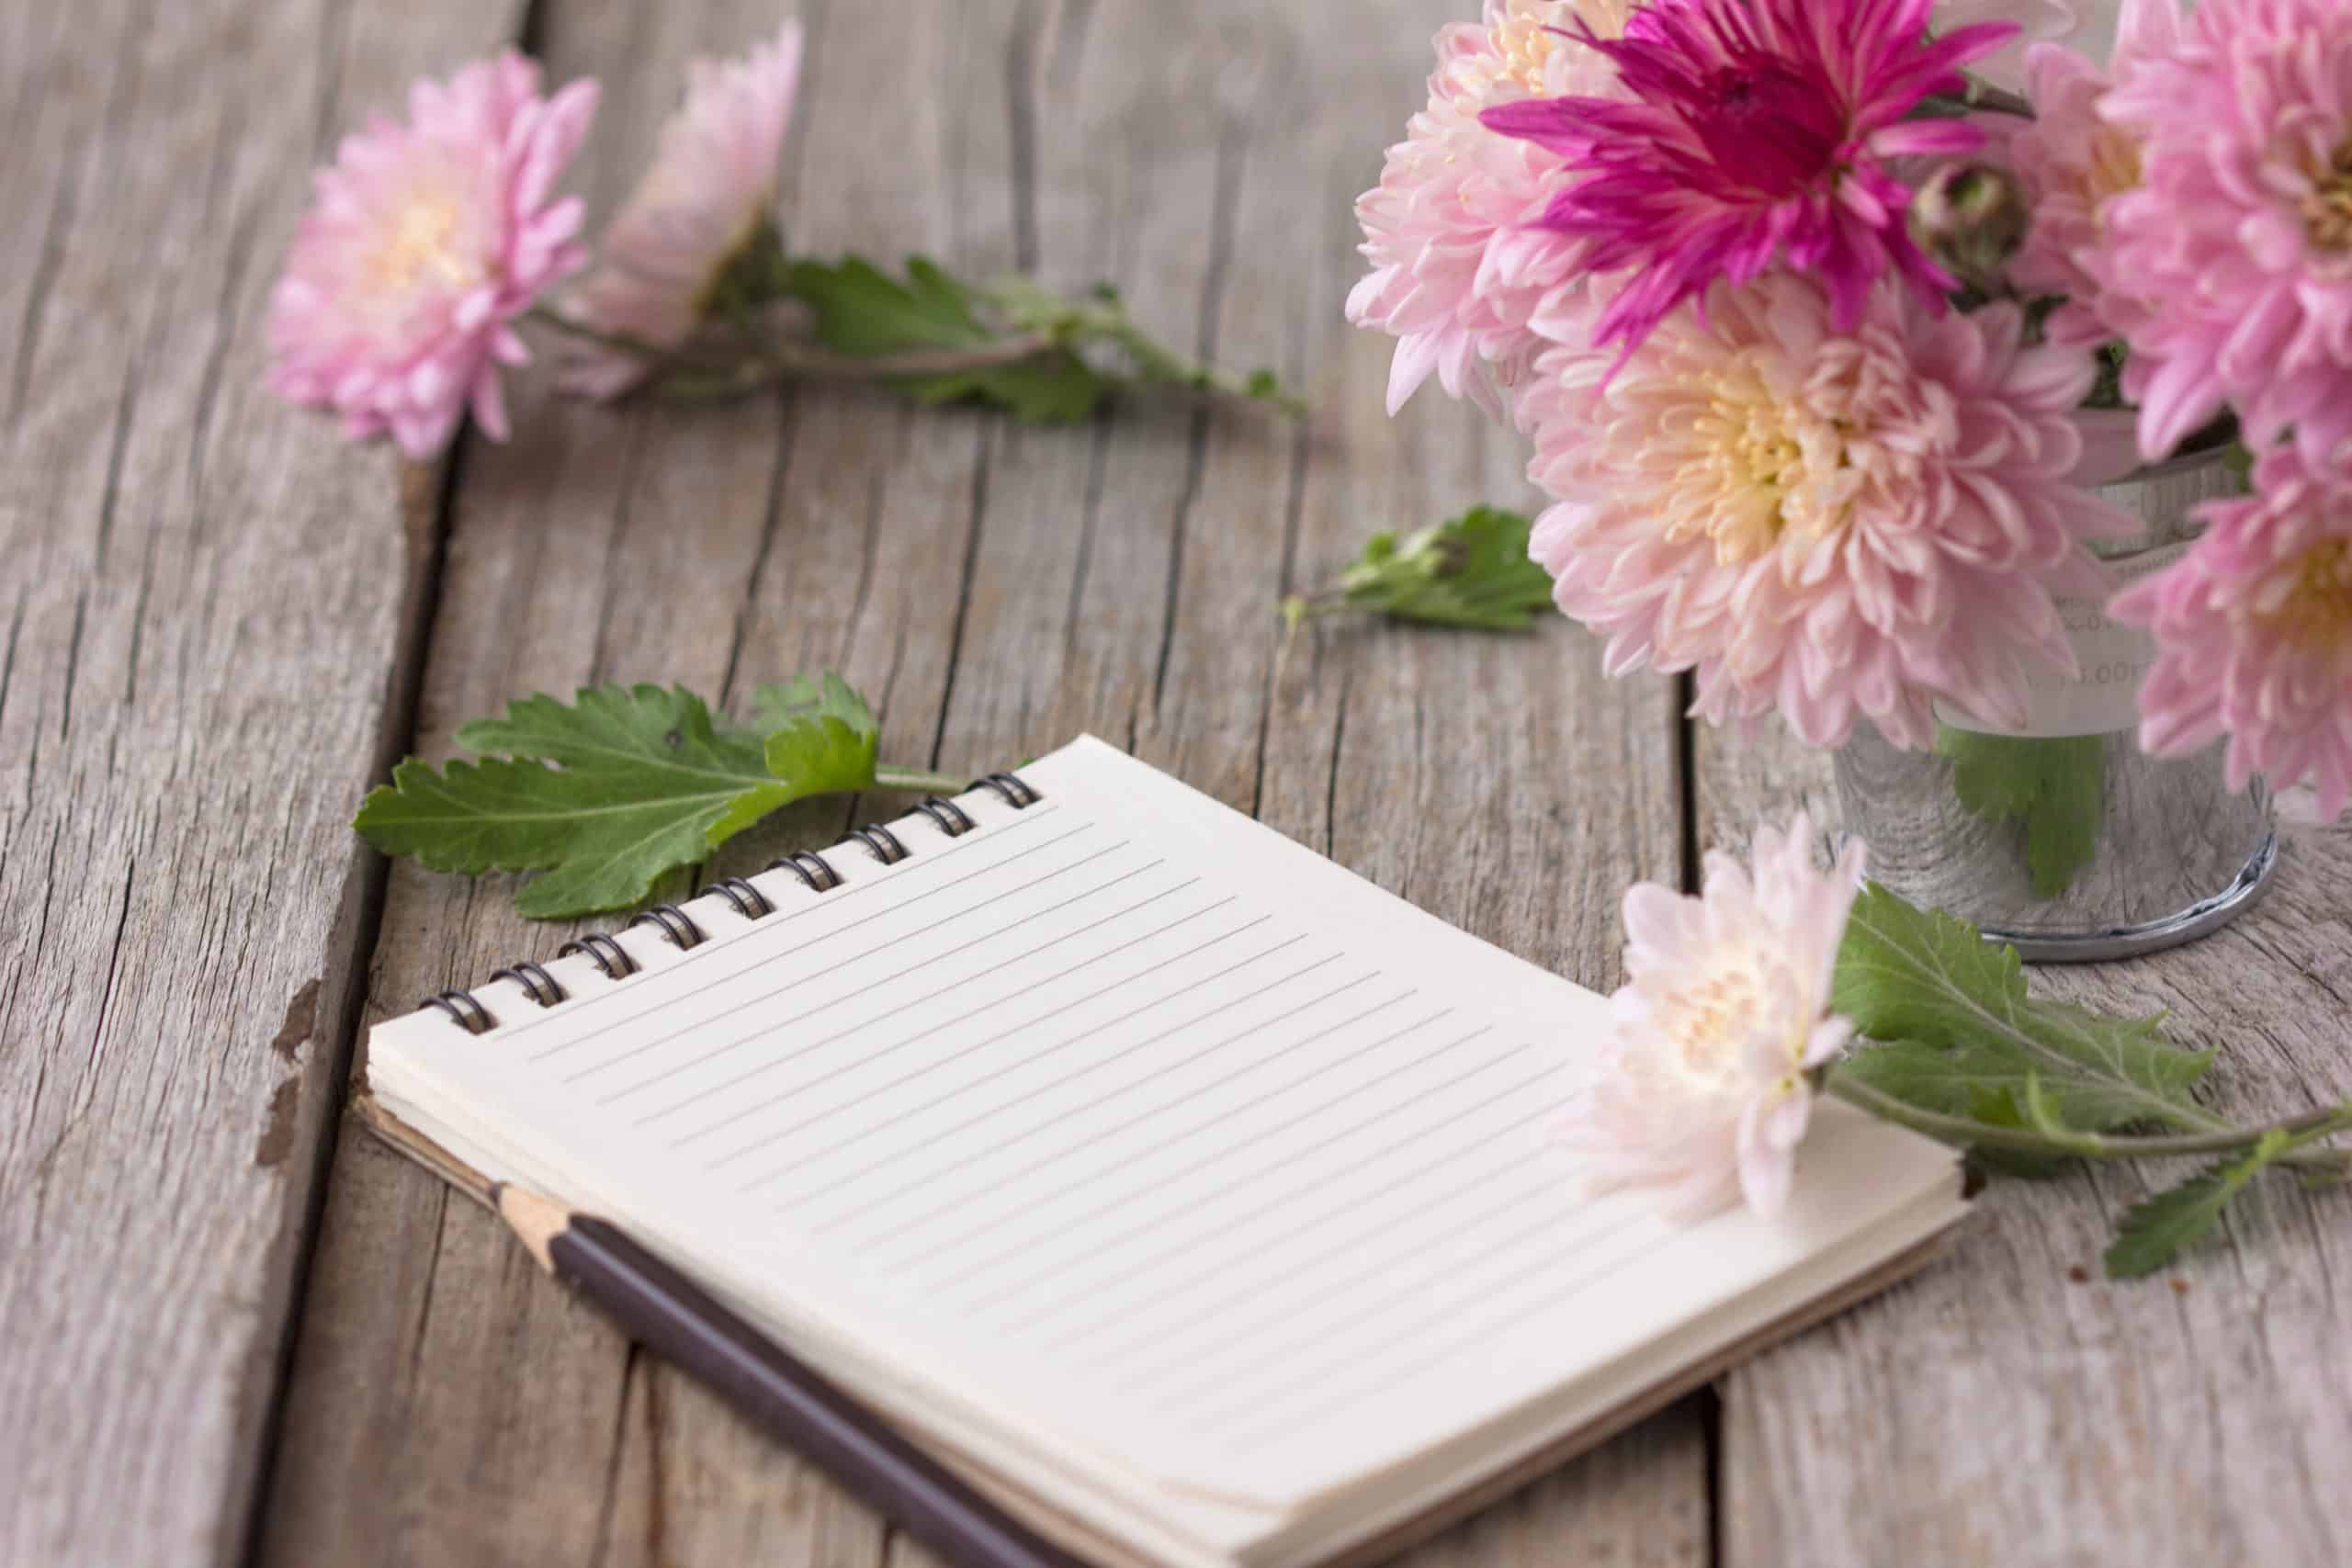 Open notebook with pen on a wooden desk with flowers.